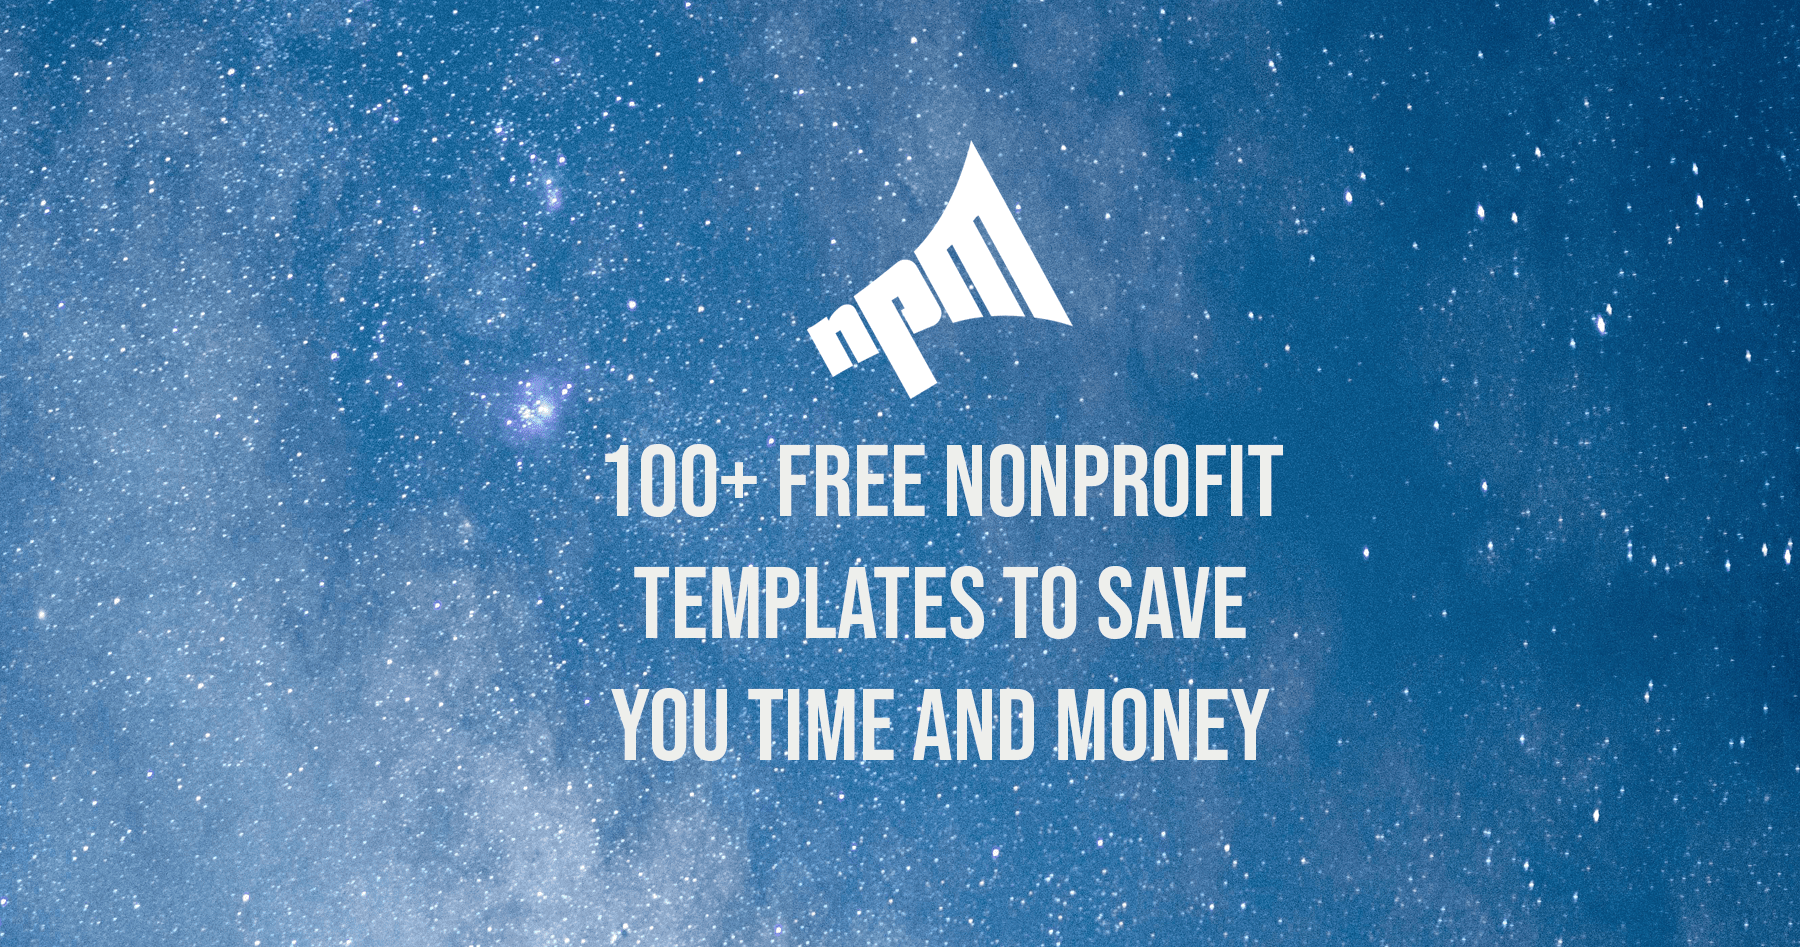 24+ Free Nonprofit Templates To Save You Time & Money - Nonprofit Inside Fundraising Pledge Card Template